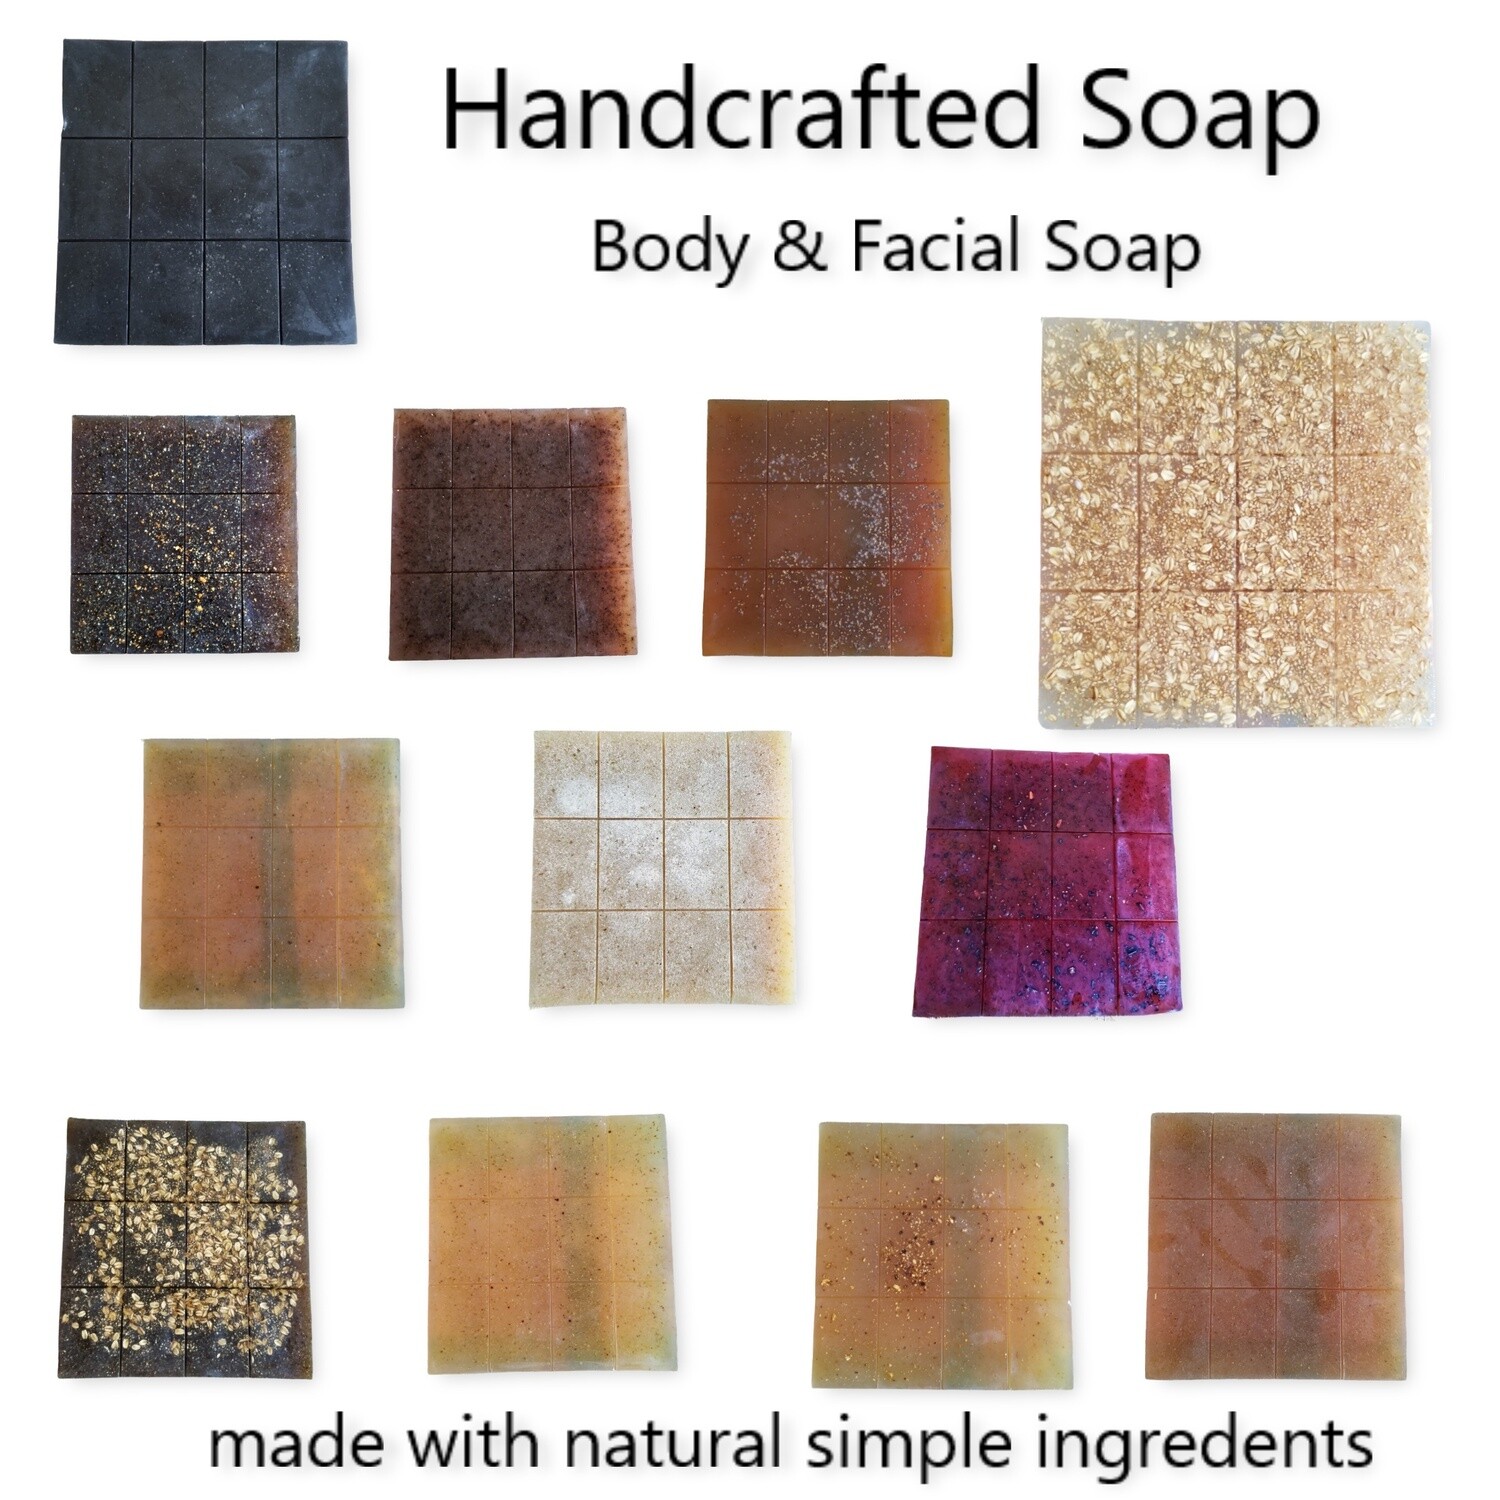 Handcrafted Soap by Batch